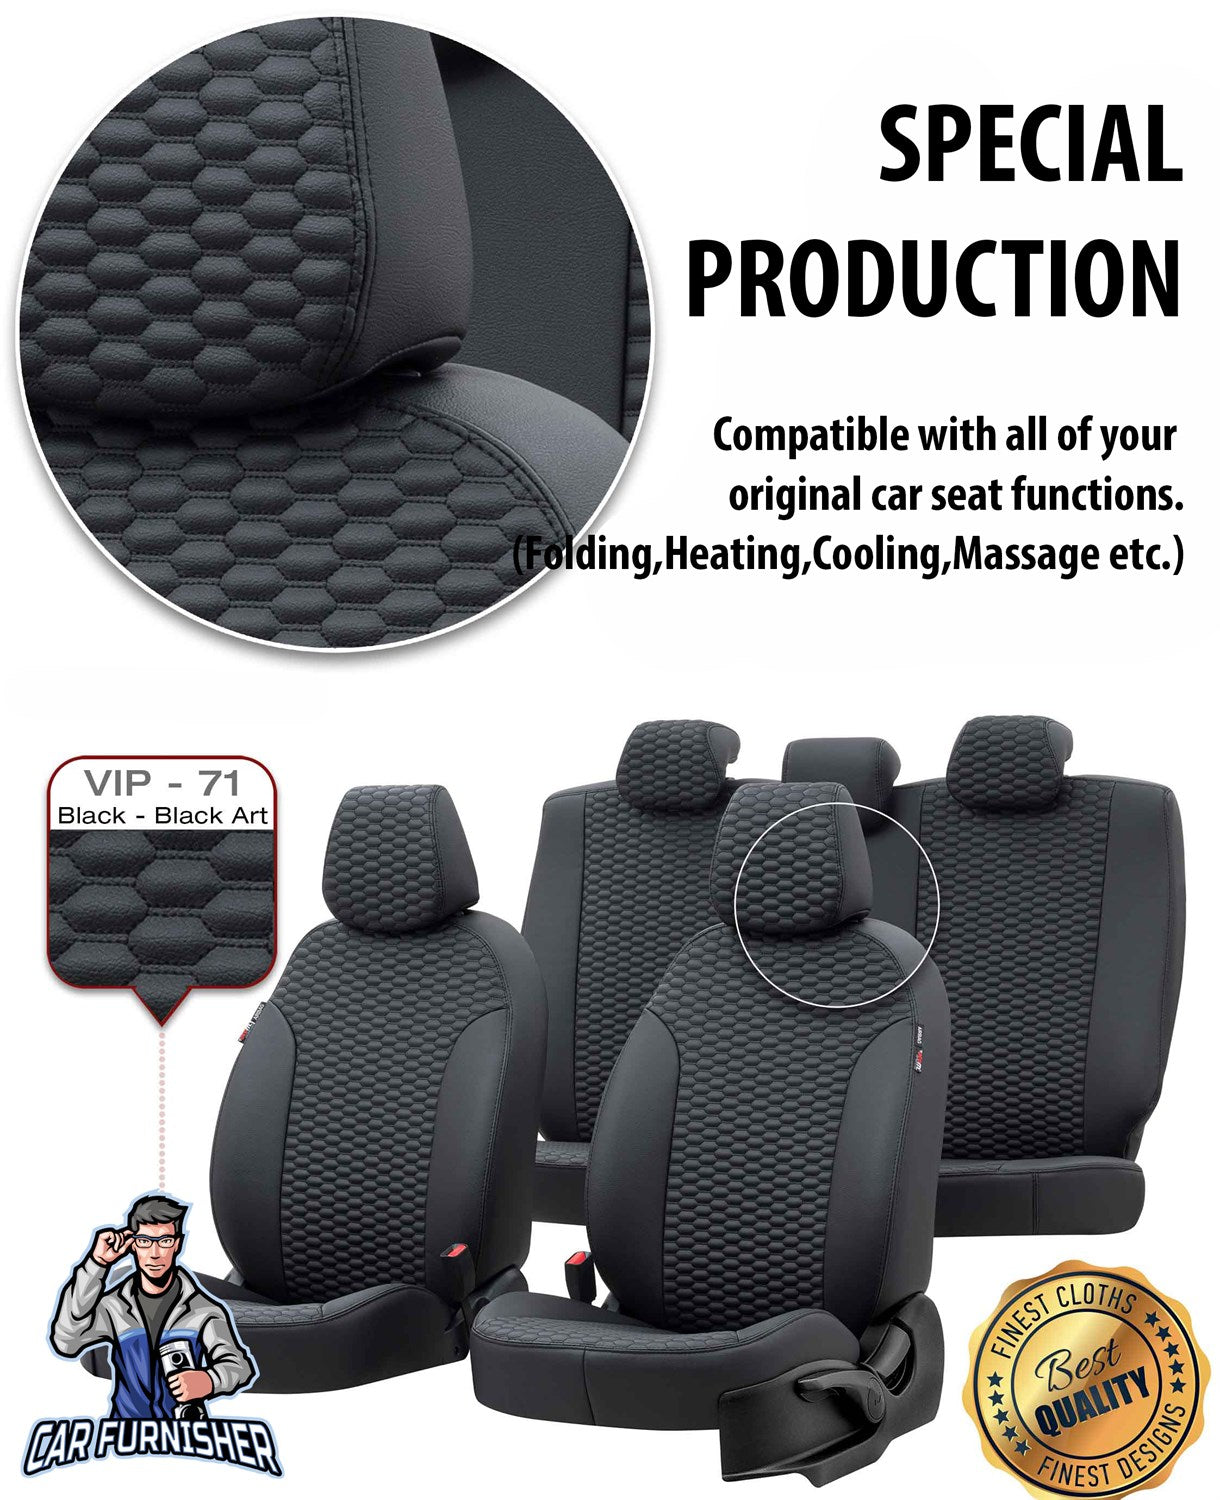 Volkswagen Beetle Seat Cover Tokyo Leather Design Smoked Leather